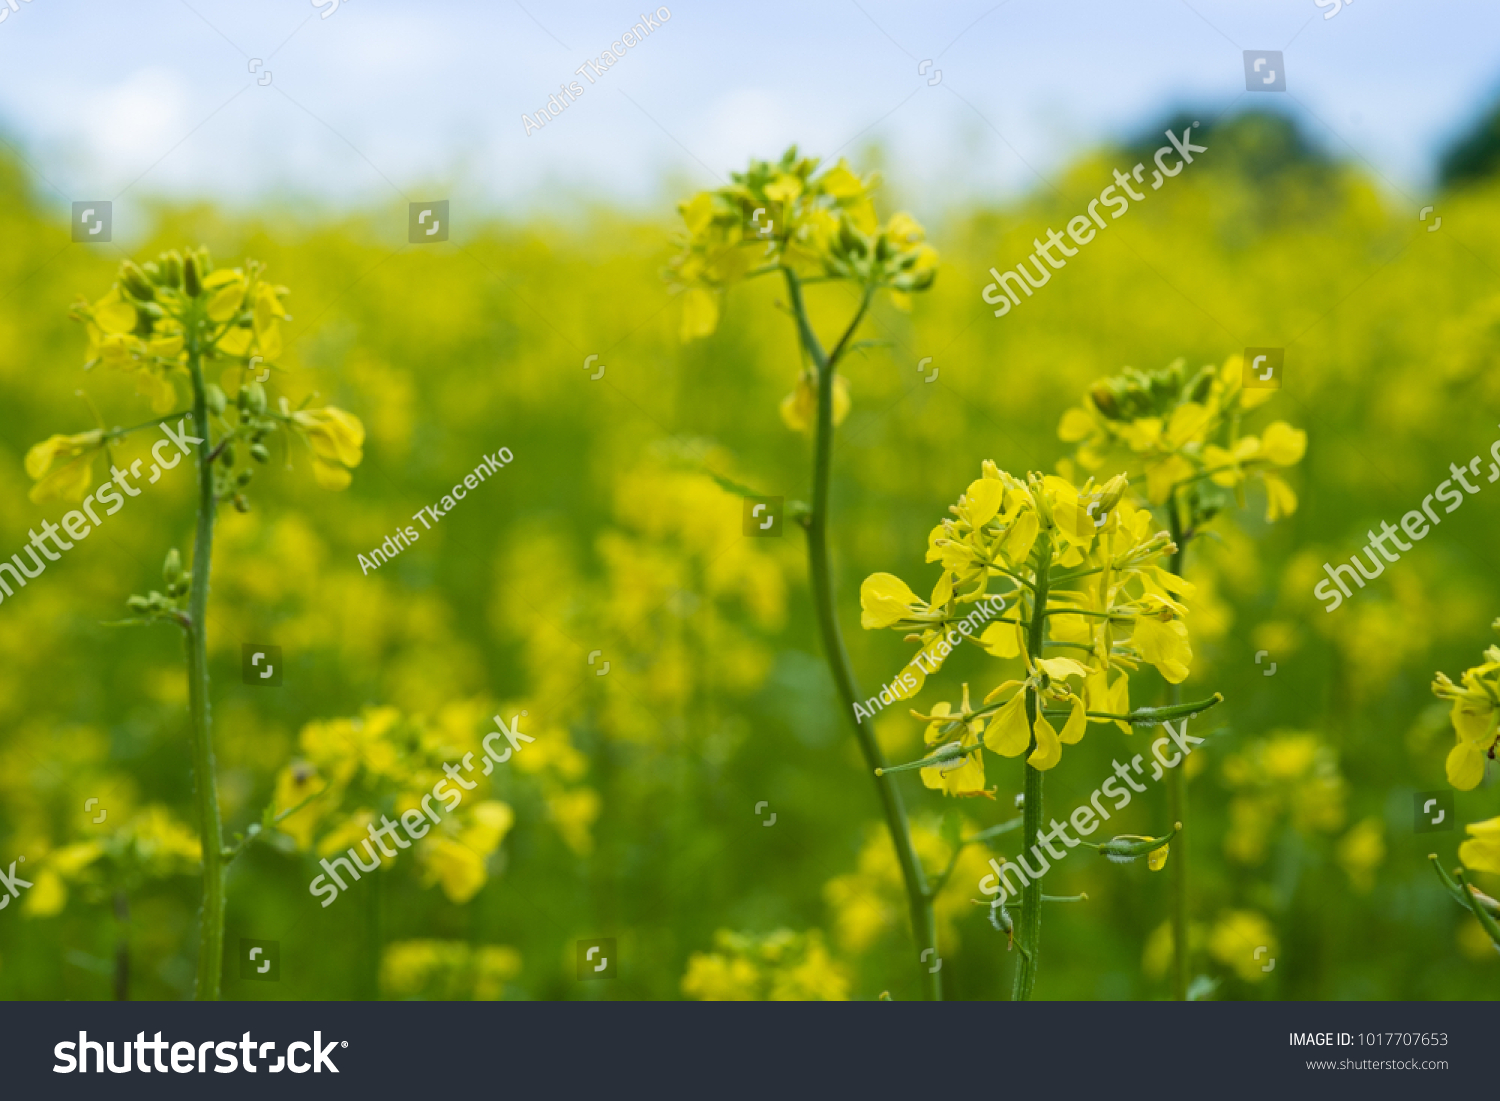 Mustard plants with green pods and beautiful yellow flowers at the farm #1017707653